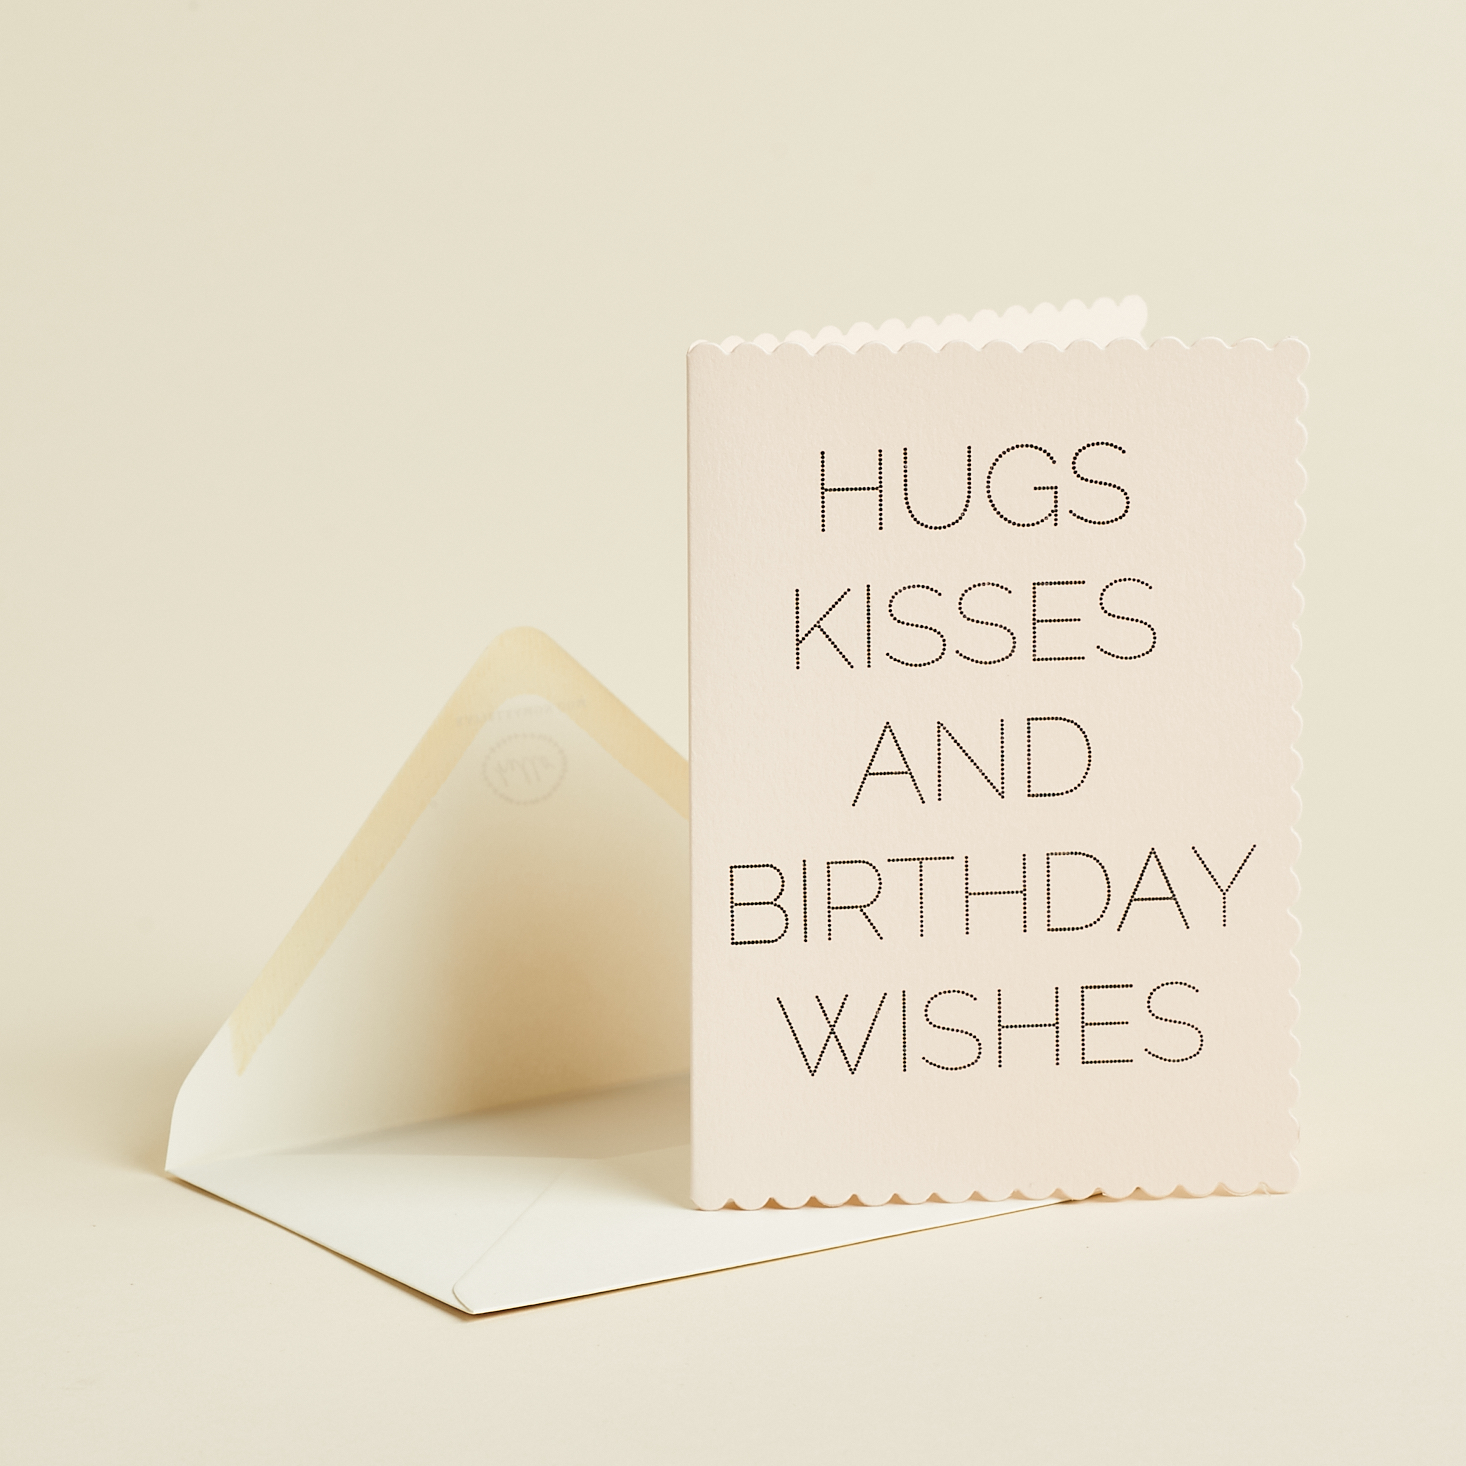 Hugs, Kisses, and Birthday Wishes card from Postmarkd Studio February 2021